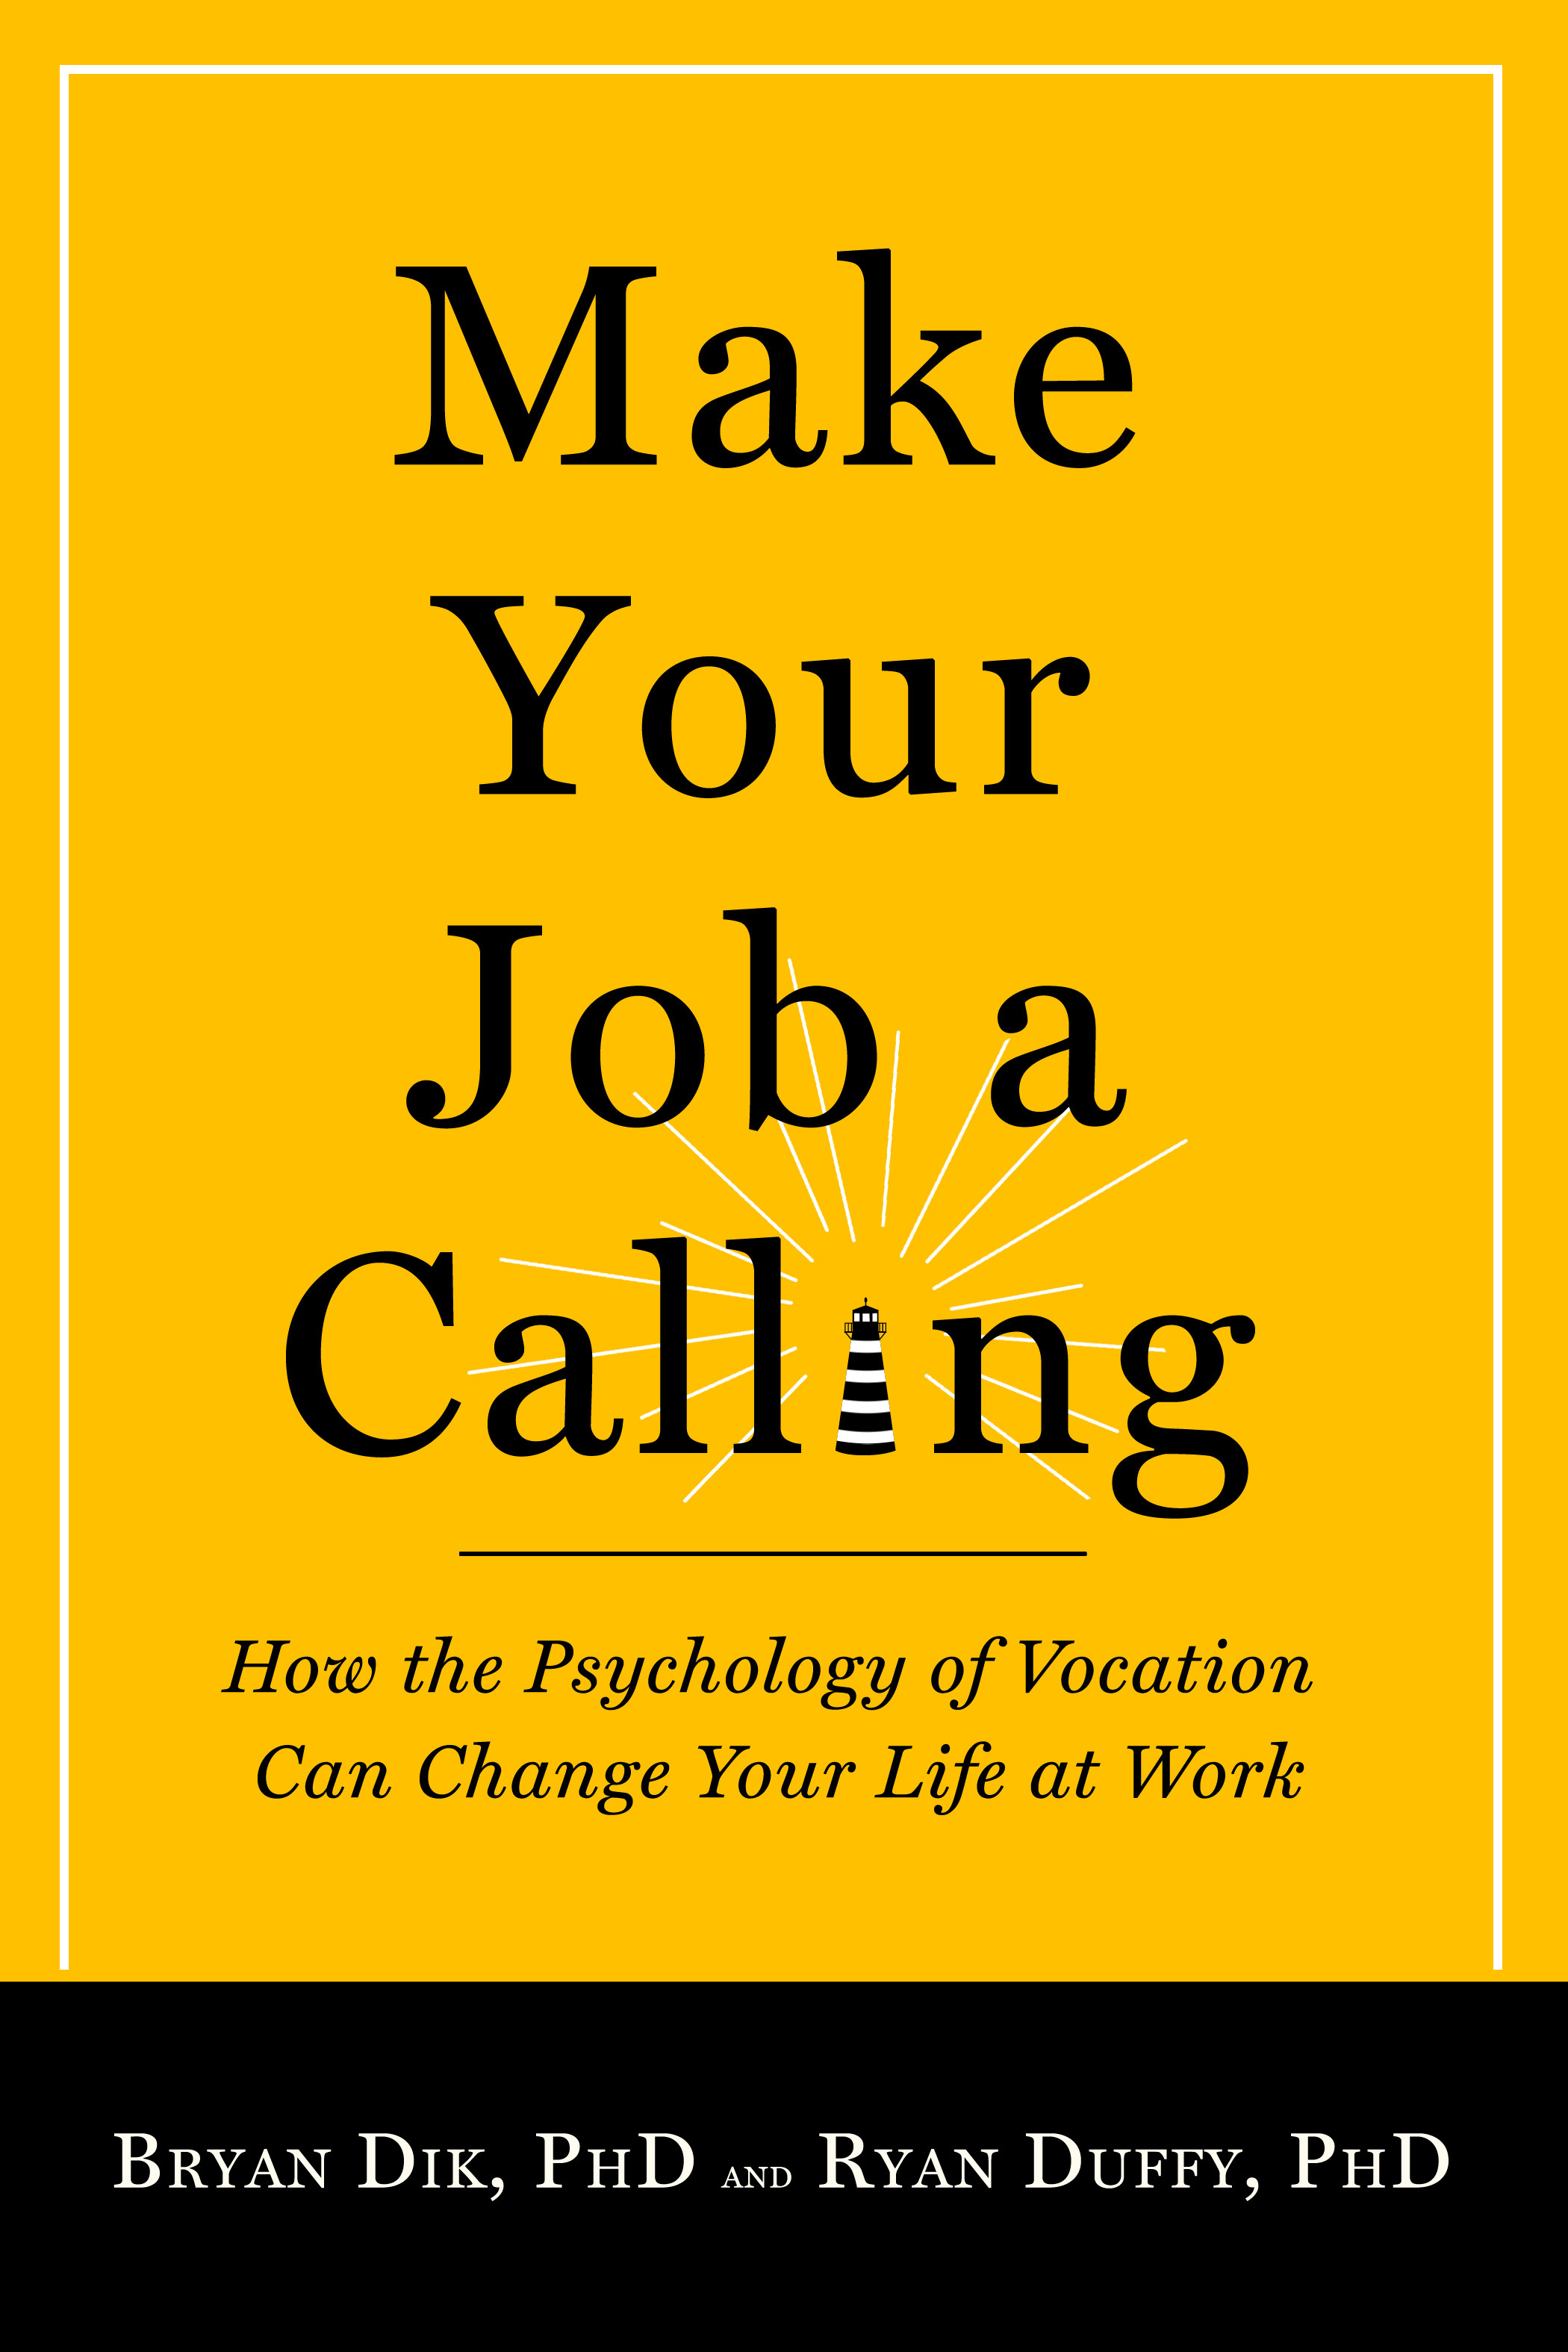 What to say when your calling about a job